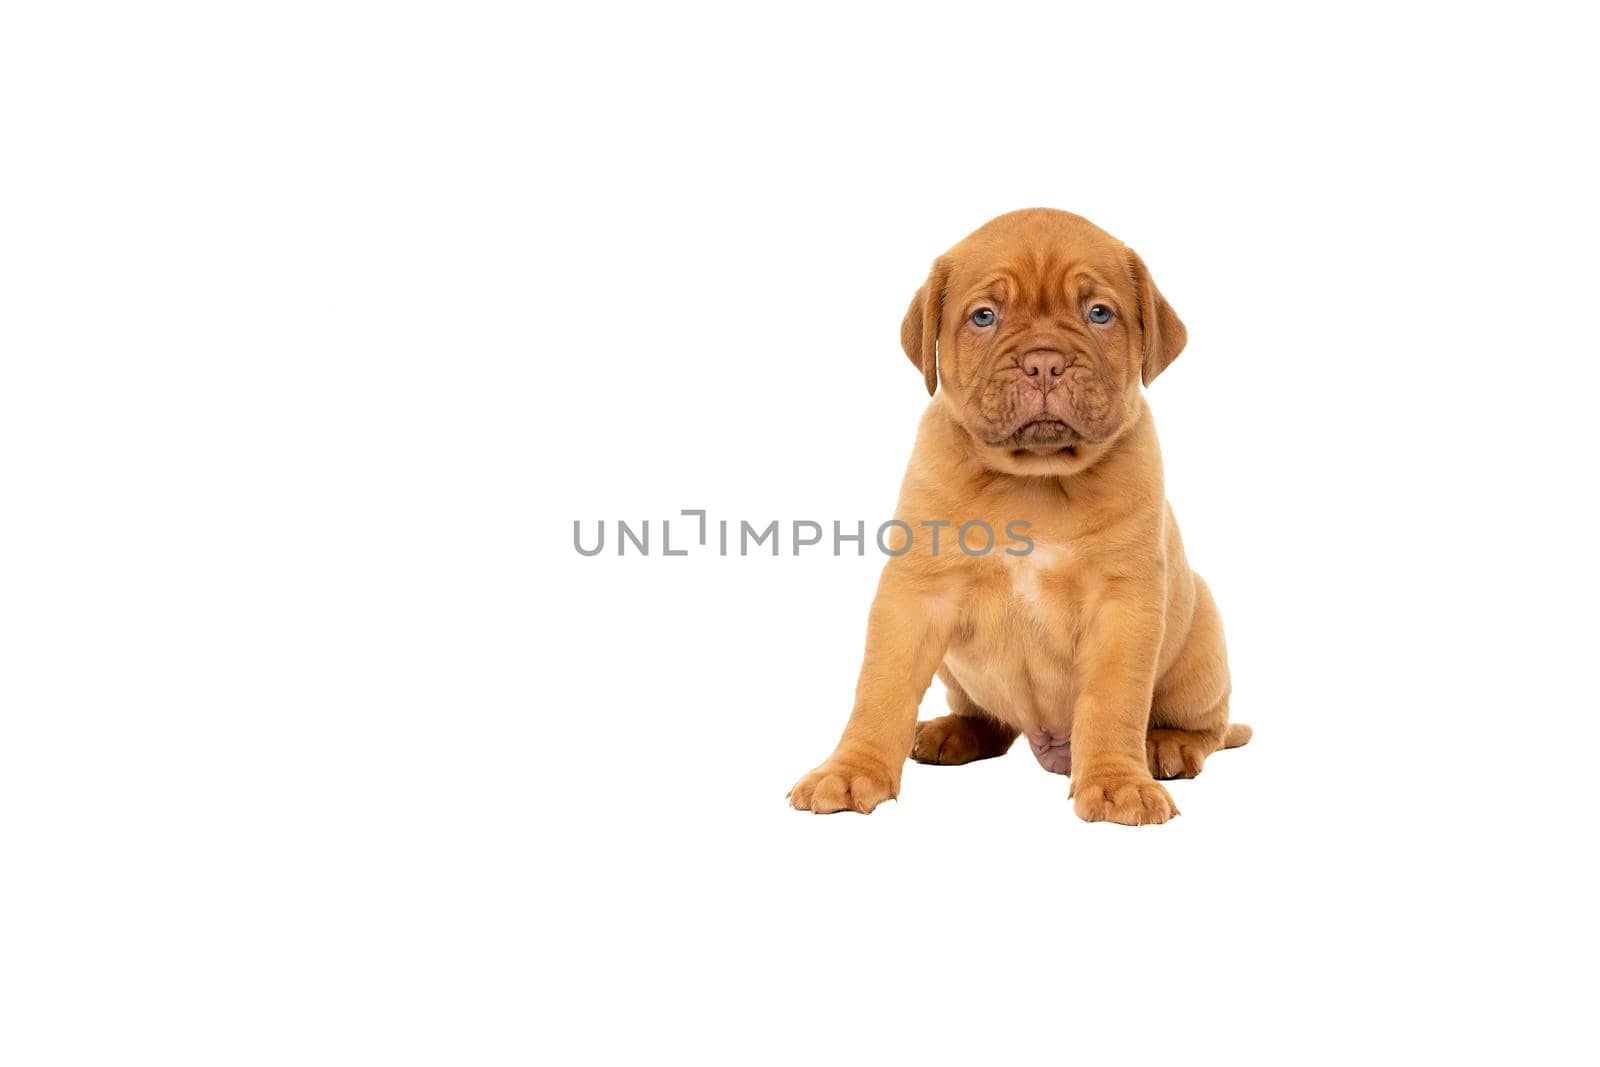 Cute puppy French breed dogue de Bordeaux isolated on a white background by LeoniekvanderVliet